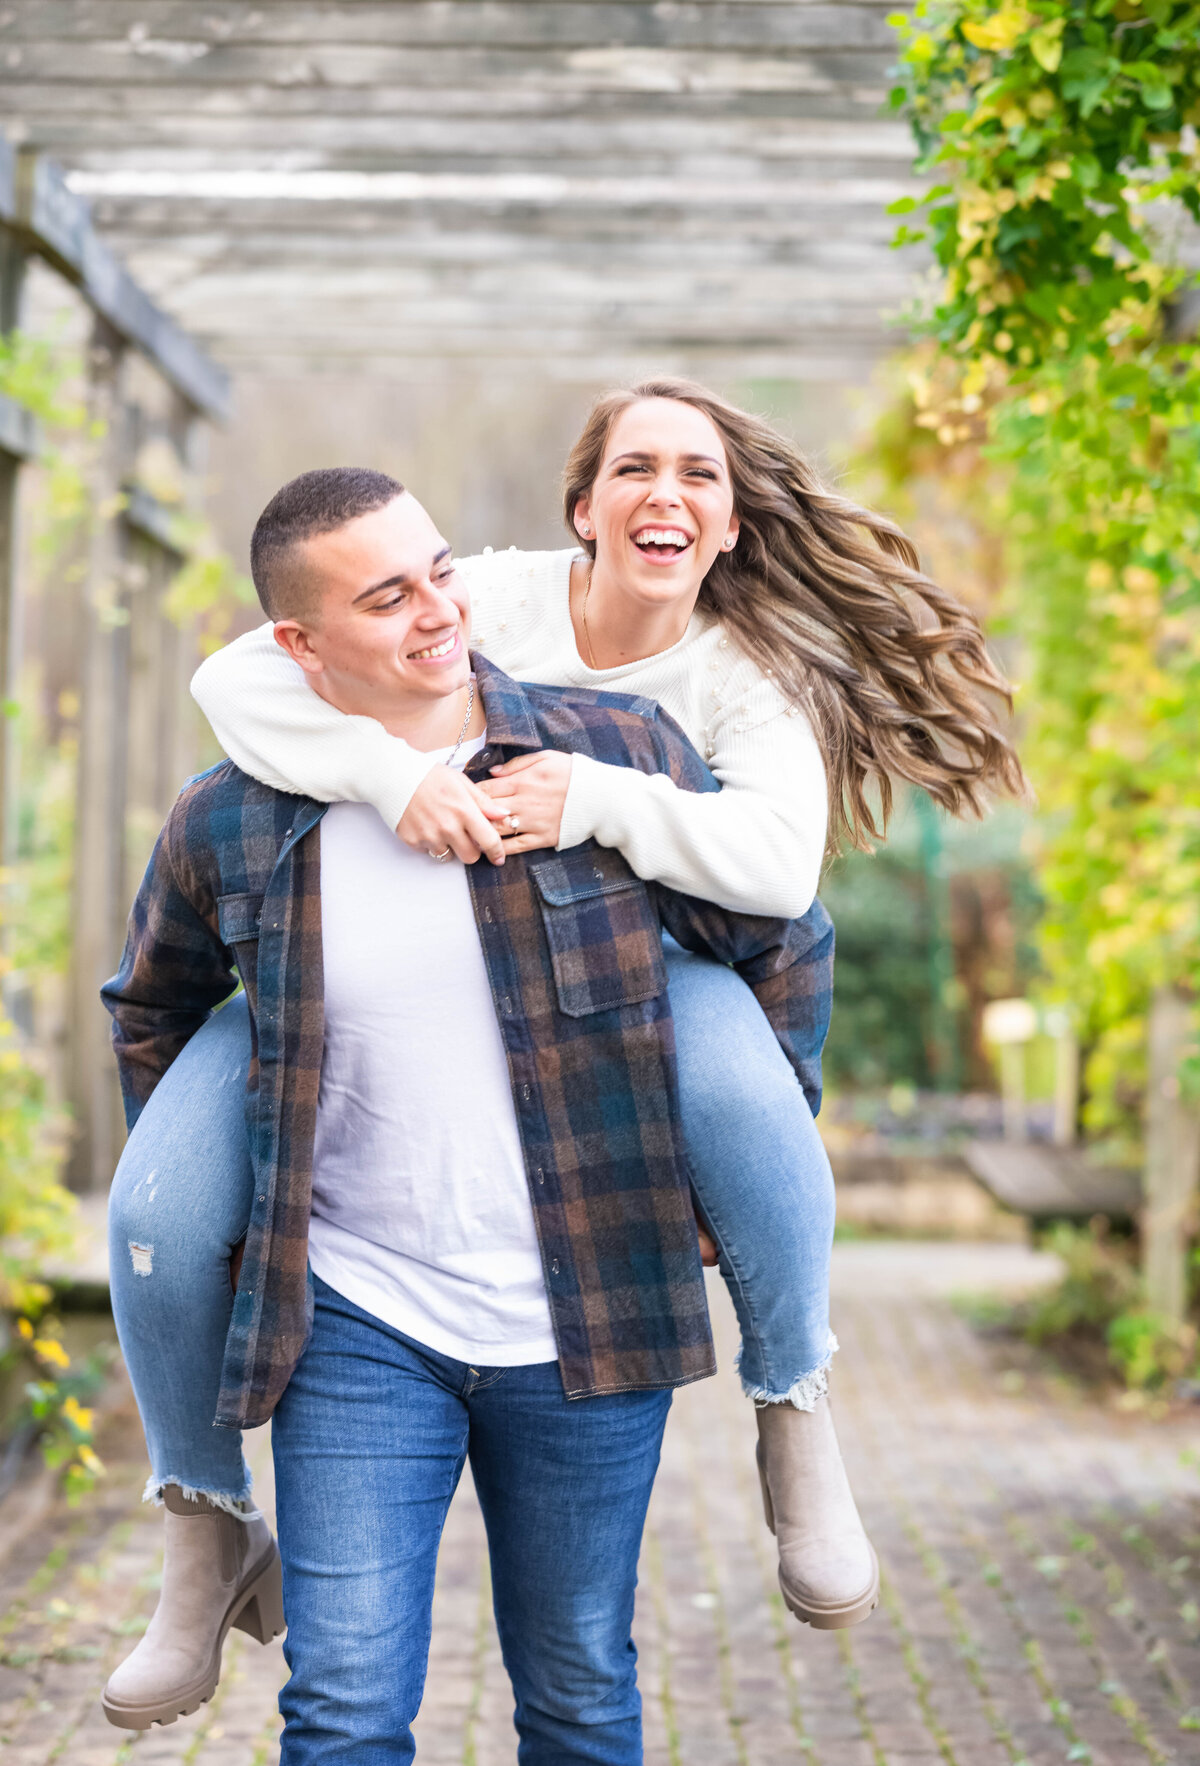 woman on man back laughing